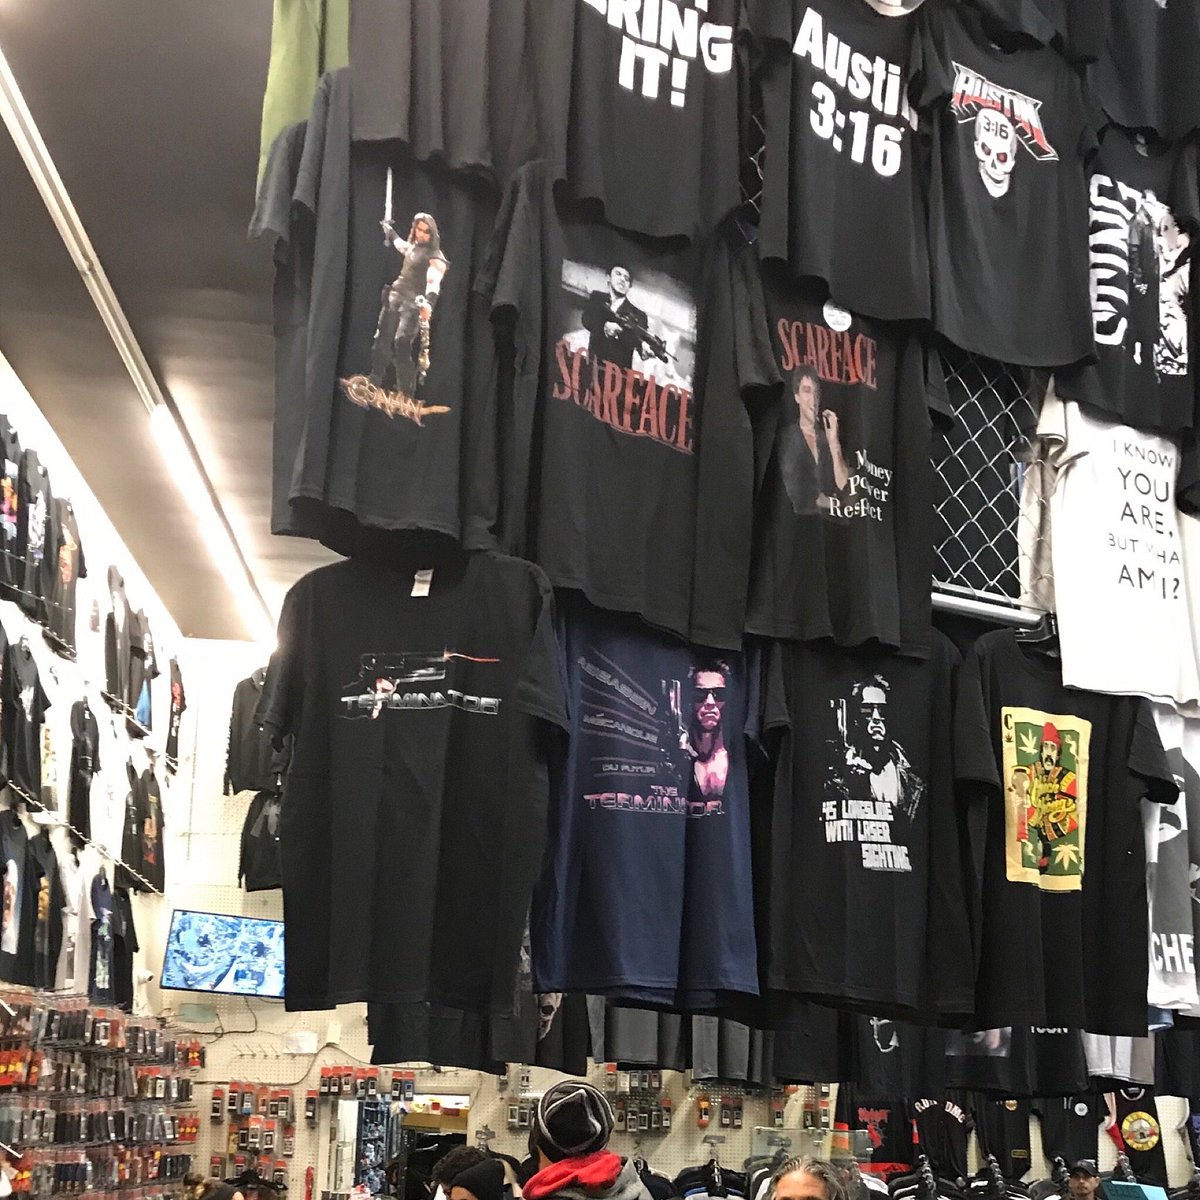 The Rock Shop (Vancouver) - All You Need to Know You Go (with Photos)